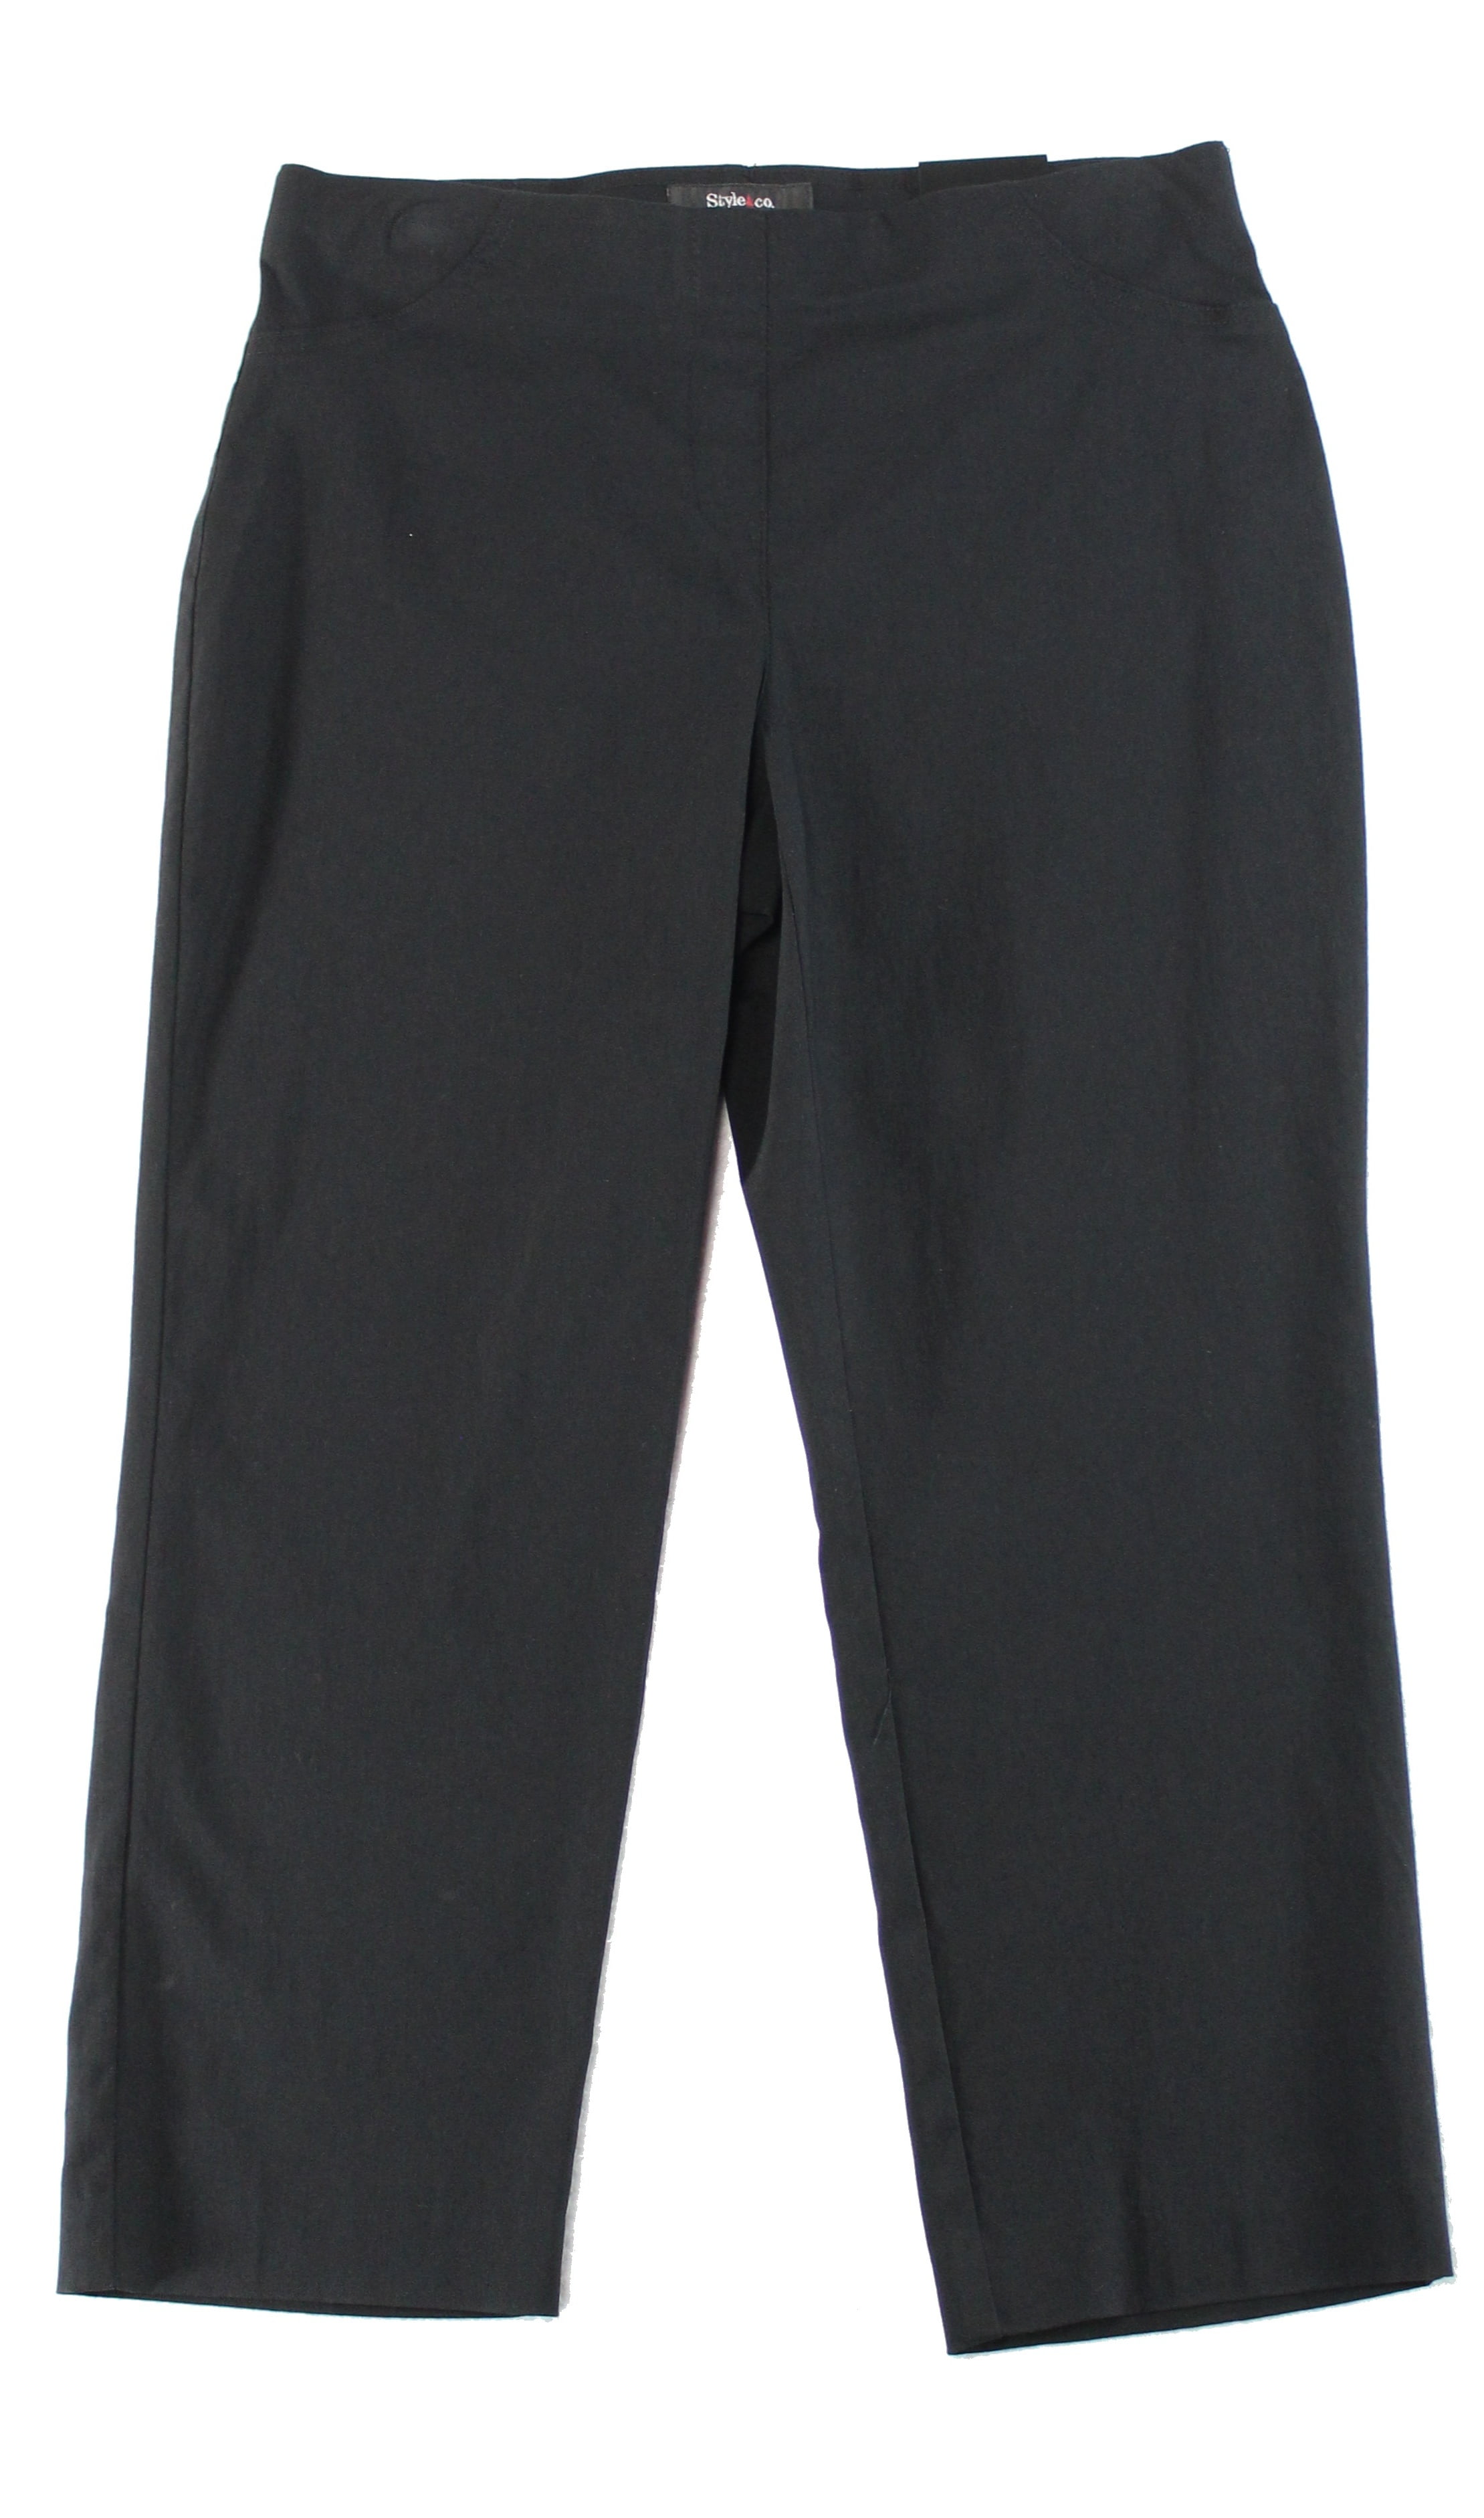 Style & Co. - Style & Co. NEW Black Womens Size Small S Stretch Capris ...